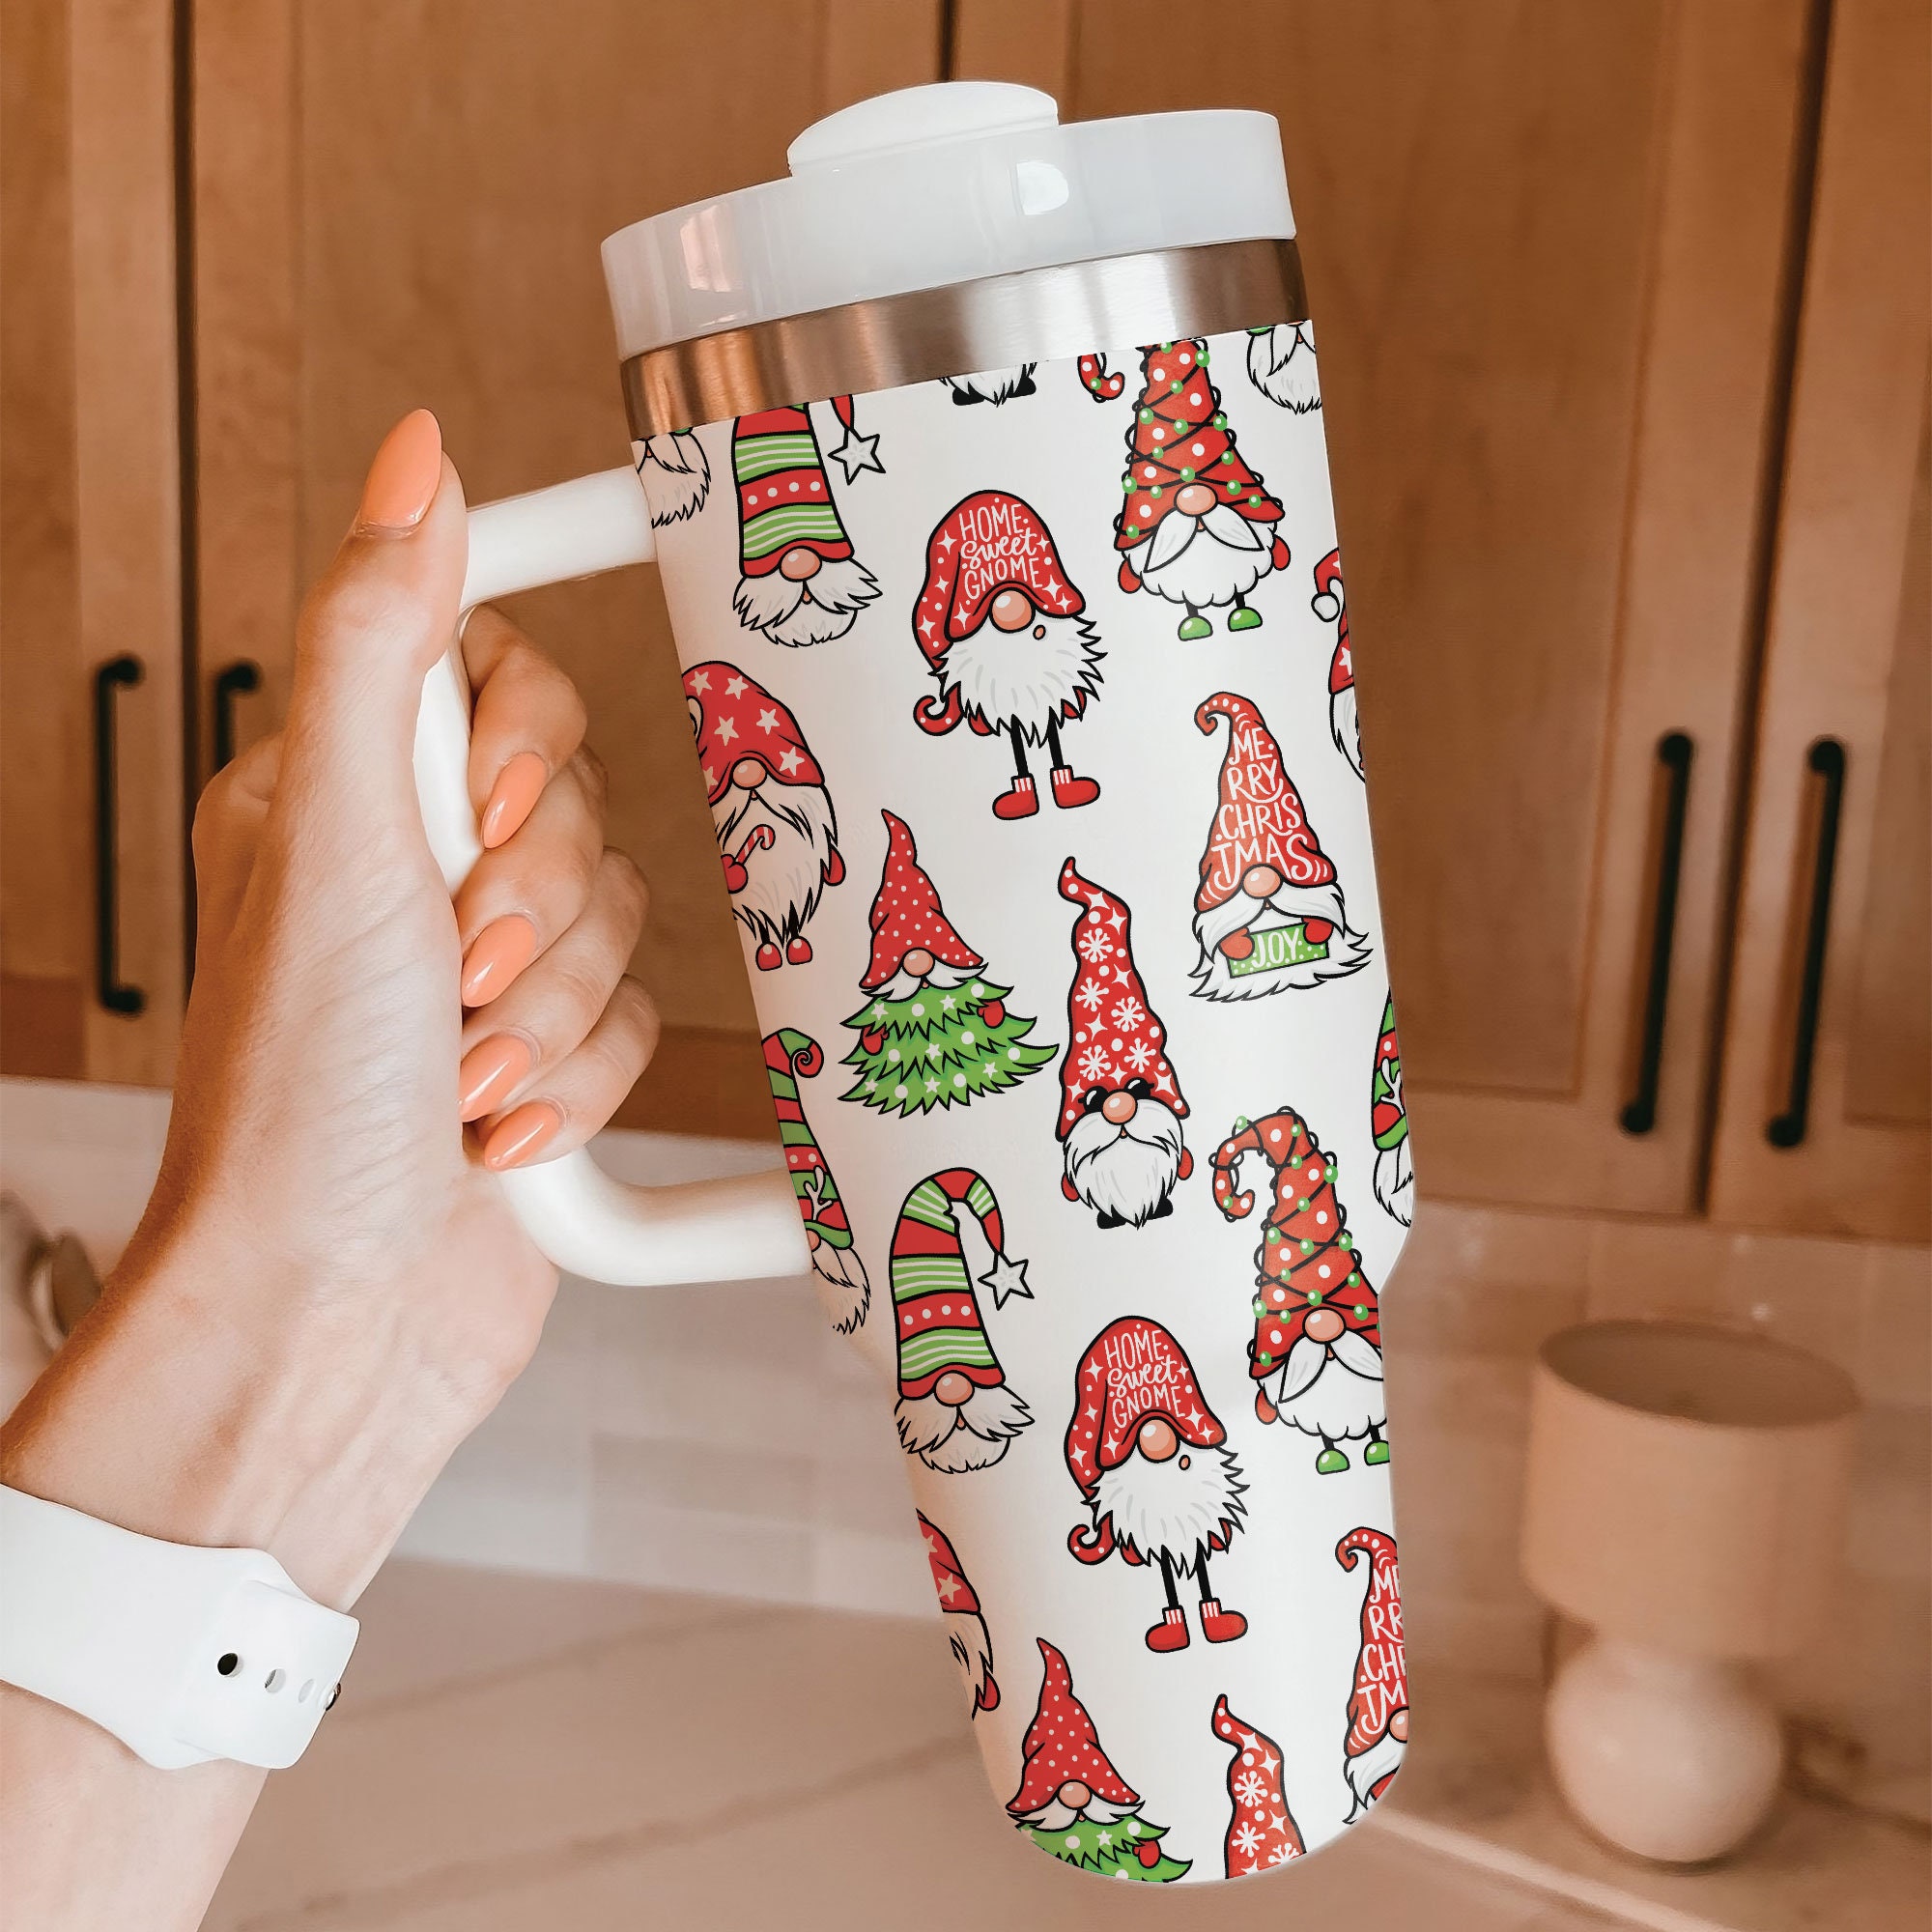 Gnome For The Holidays Tumbler with Straw & Lid Sparkly Glitter Stars NWT